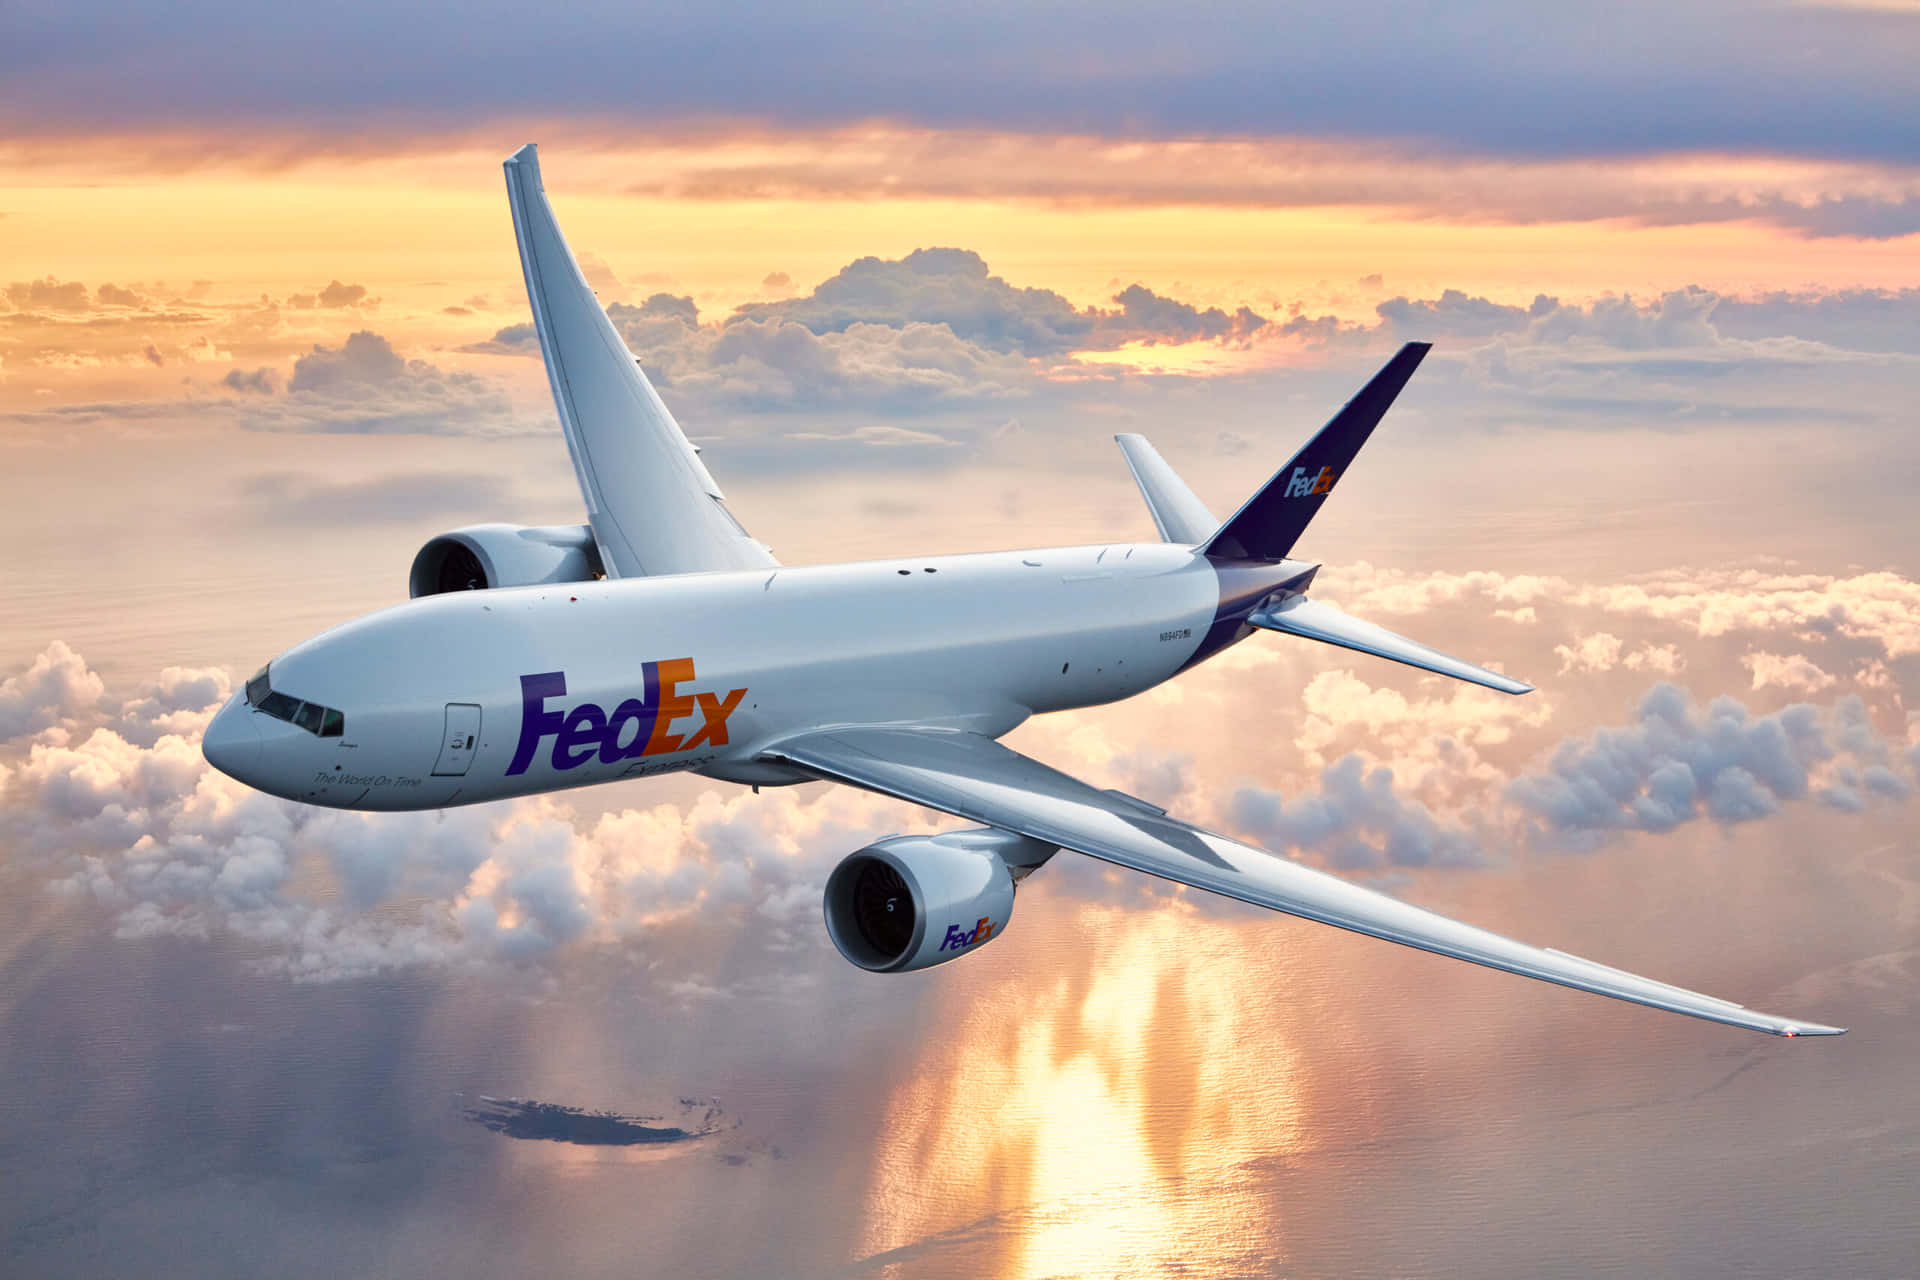 Fedex - A Large Jet Flying Over The Ocean